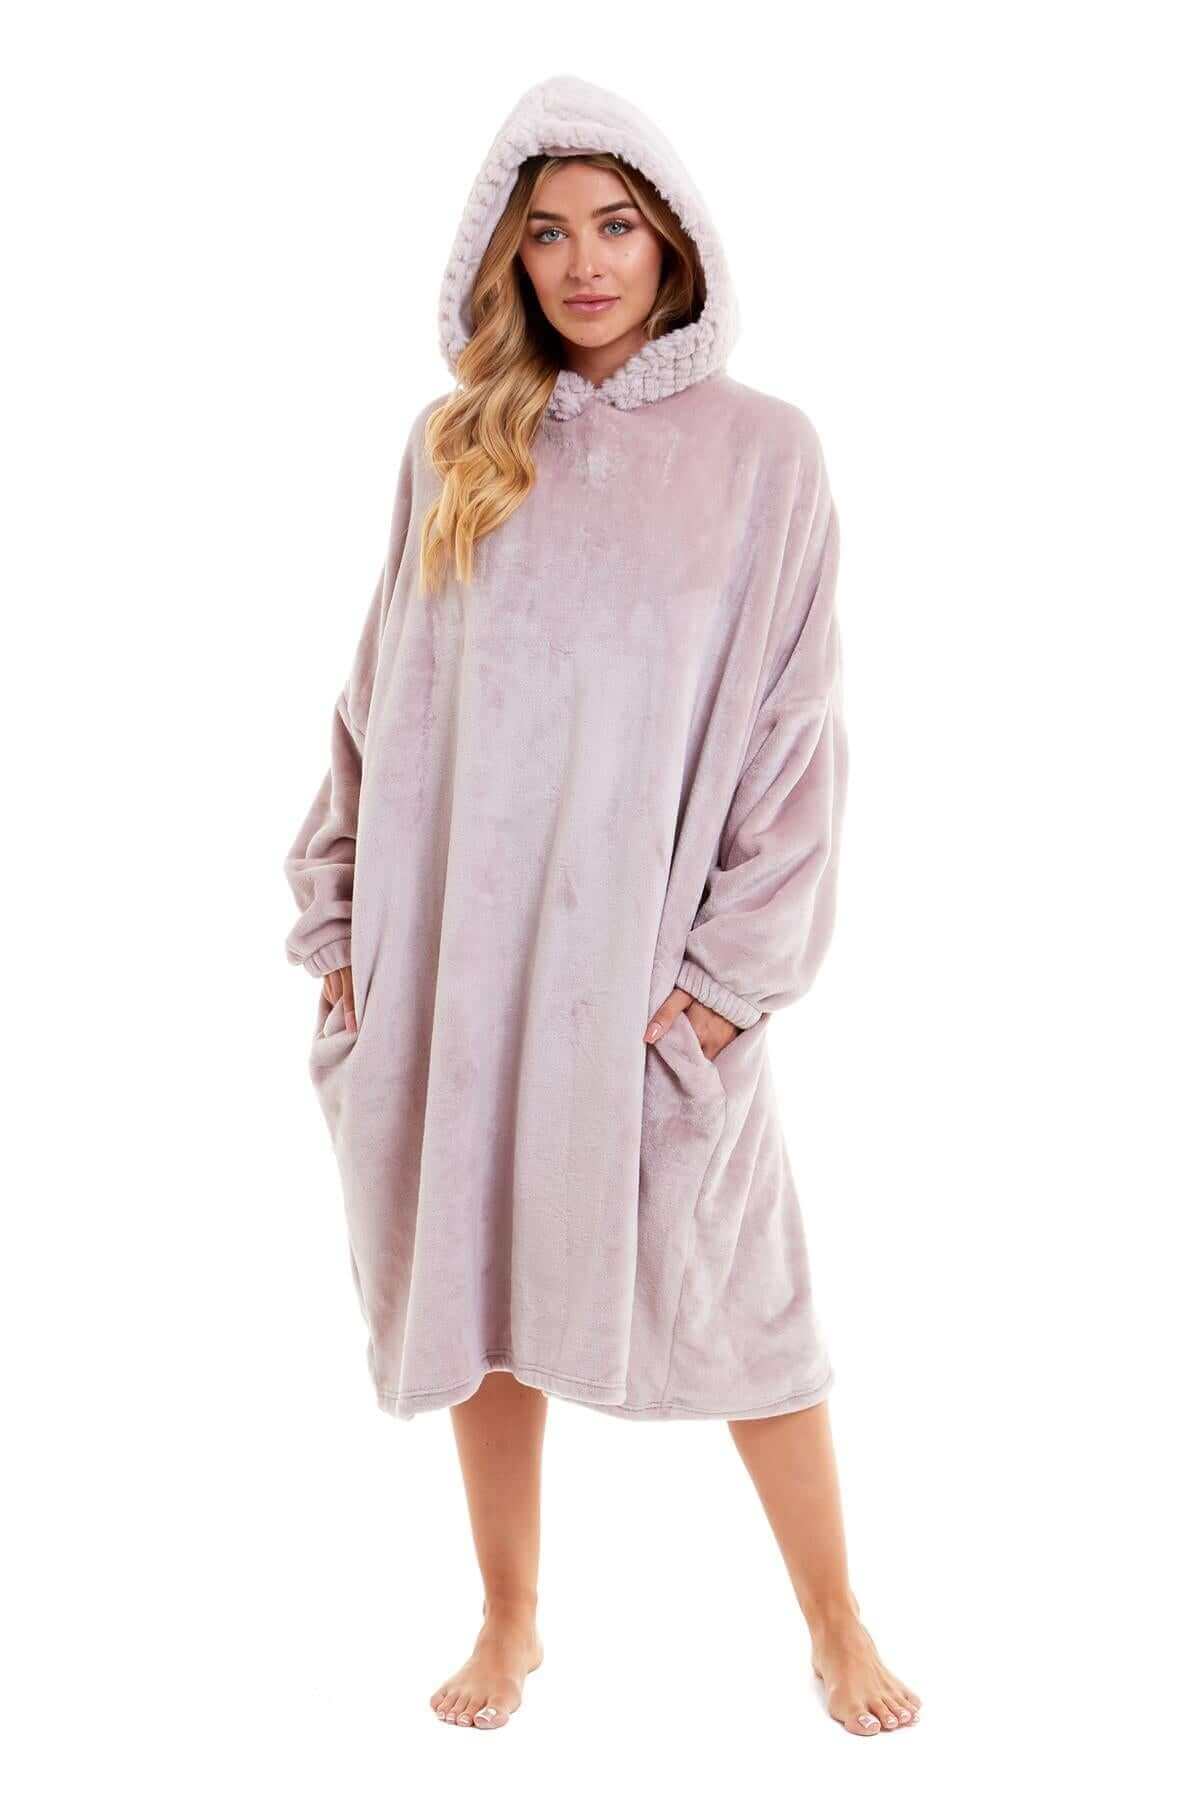 Women's Plush Hooded Poncho Blanket, Oversized Flannel Fleece Hoodie Top. Buy now for £21.00. A Hooded Blanket by Daisy Dreamer. blush pink, chunky lounge, clothing, comfortable, cosy, daisy dreamer, dusky pink, fleece, fluffy, fluffy pink, girls, grey, h